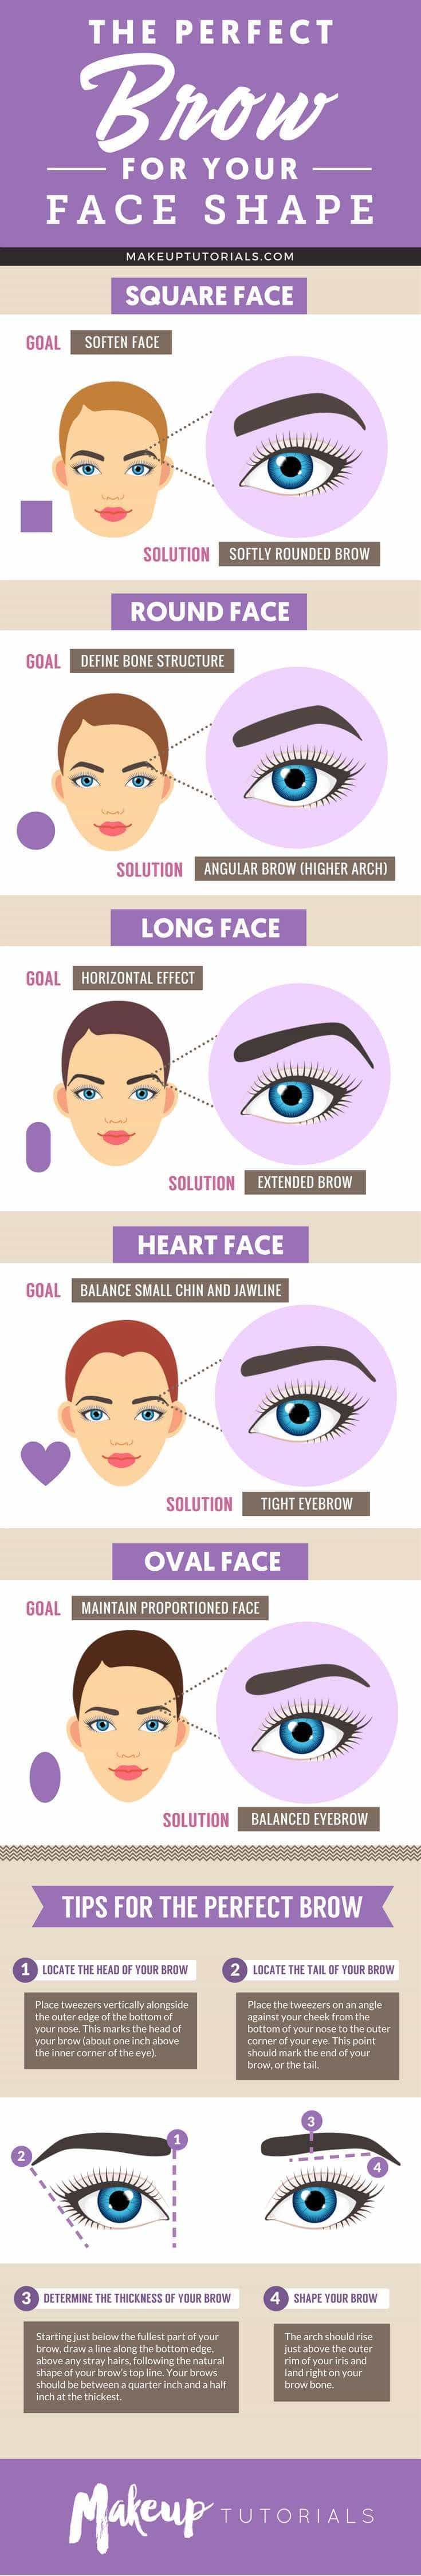 Eyebrow Tutorial: Finding The Right Brow Shape For Your Face